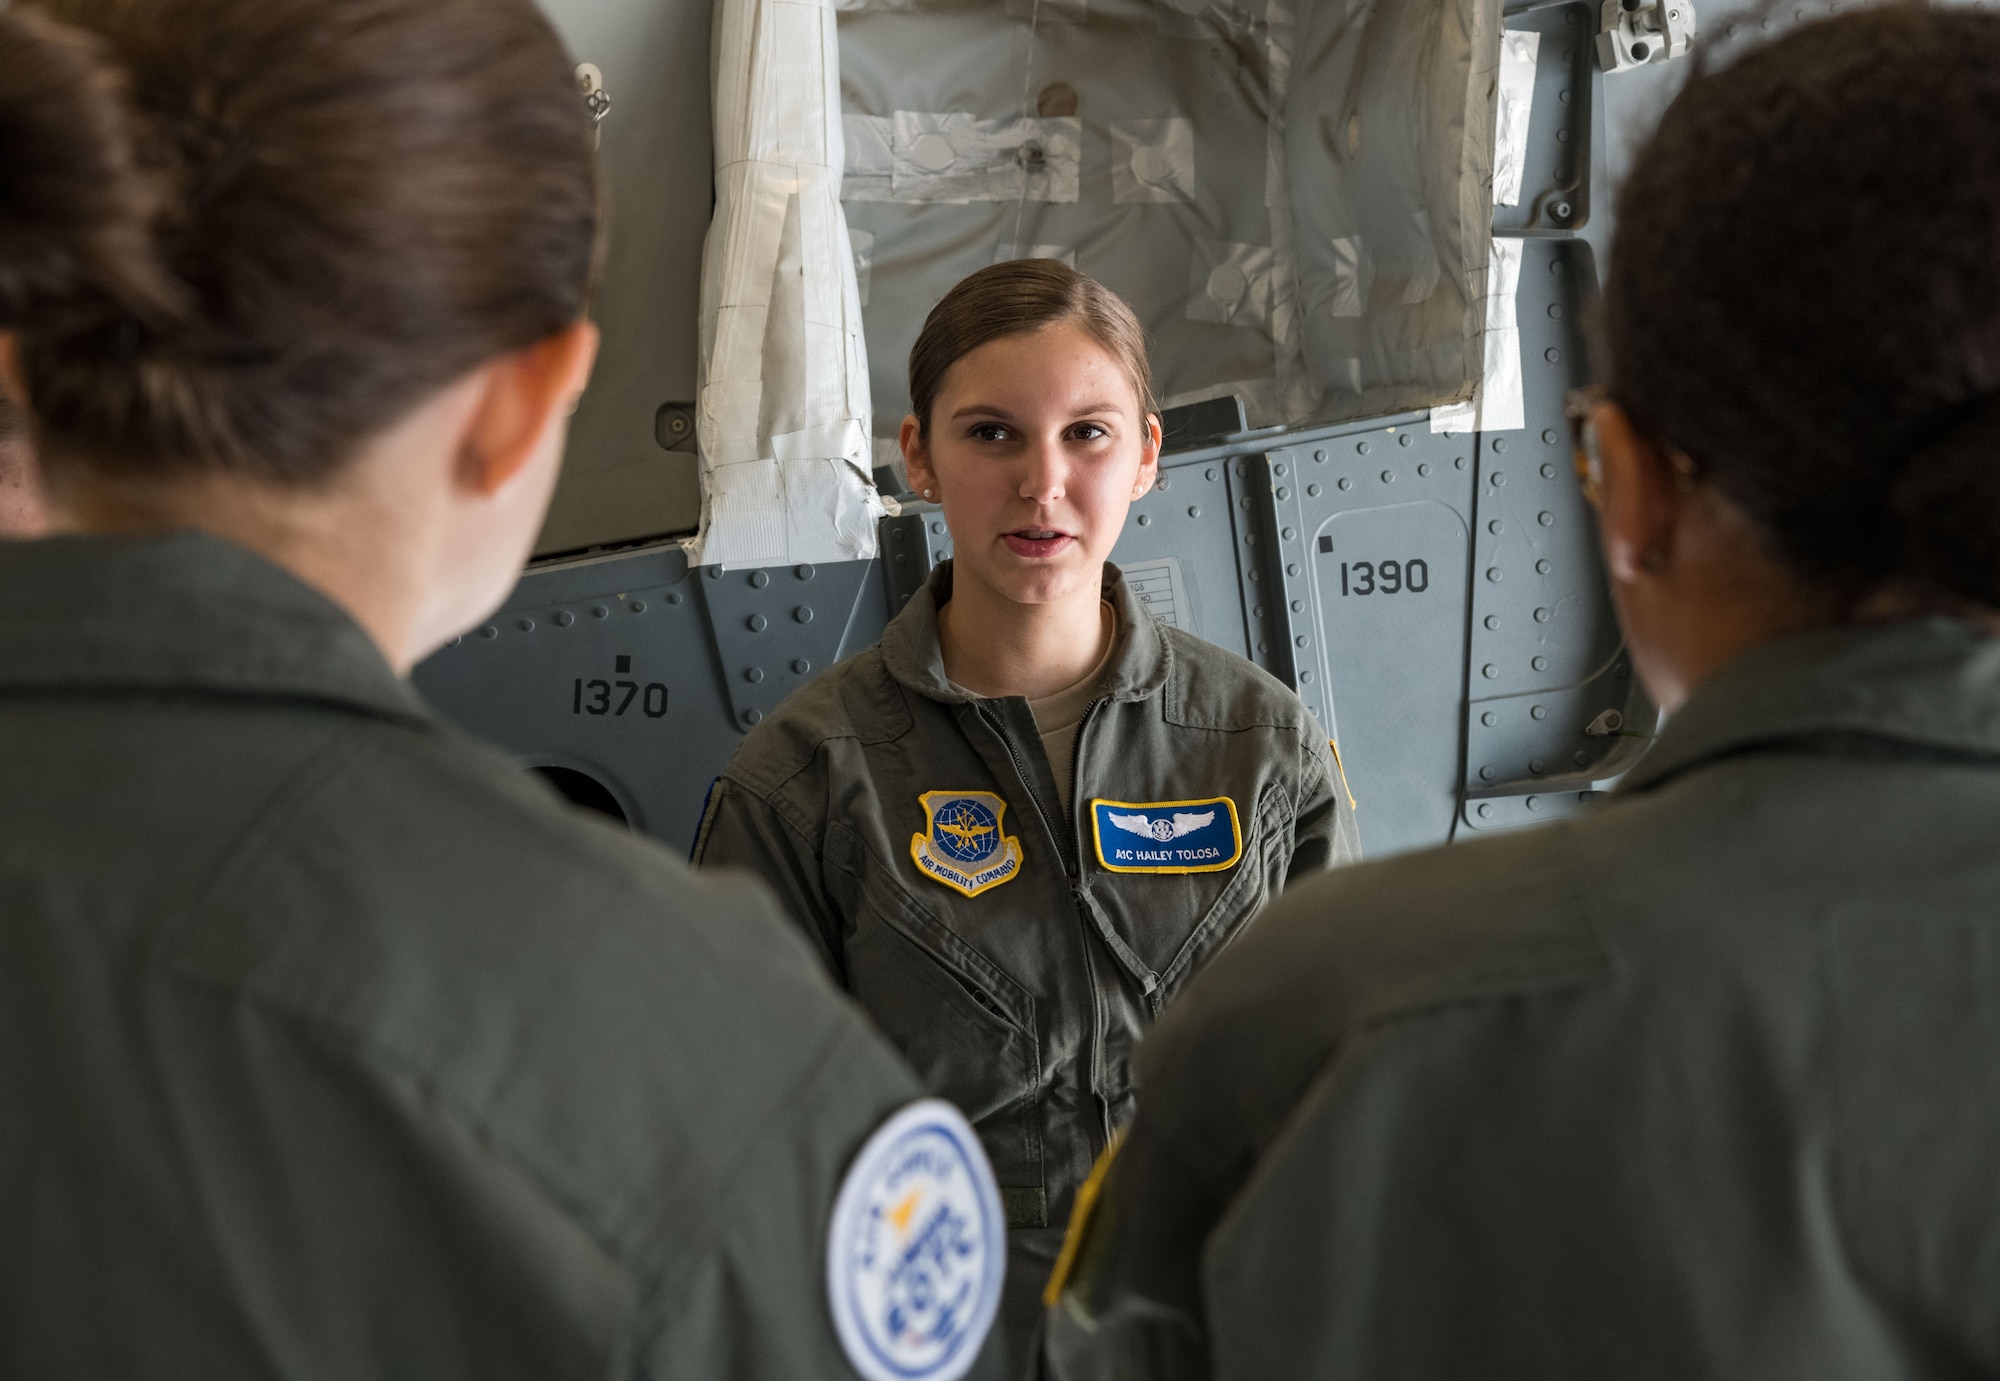 Airman 1st Class Hailey Tolosa, 3rd Airlift Squadron C-17A Globemaster III loadmaster, answers questions from Air Force Junior Reserve Officers’ Training Corps cadets about her profession in the Air Force July 23, 2019, at Dover Air Force Base, Del. Cadets who attended the AFJROTC Summer Flight Academy at Delaware State University in Dover, met with Tolosa and other C-17 aircrew members during their half-day tour of the base. (U.S. Air Force photo by Roland Balik)